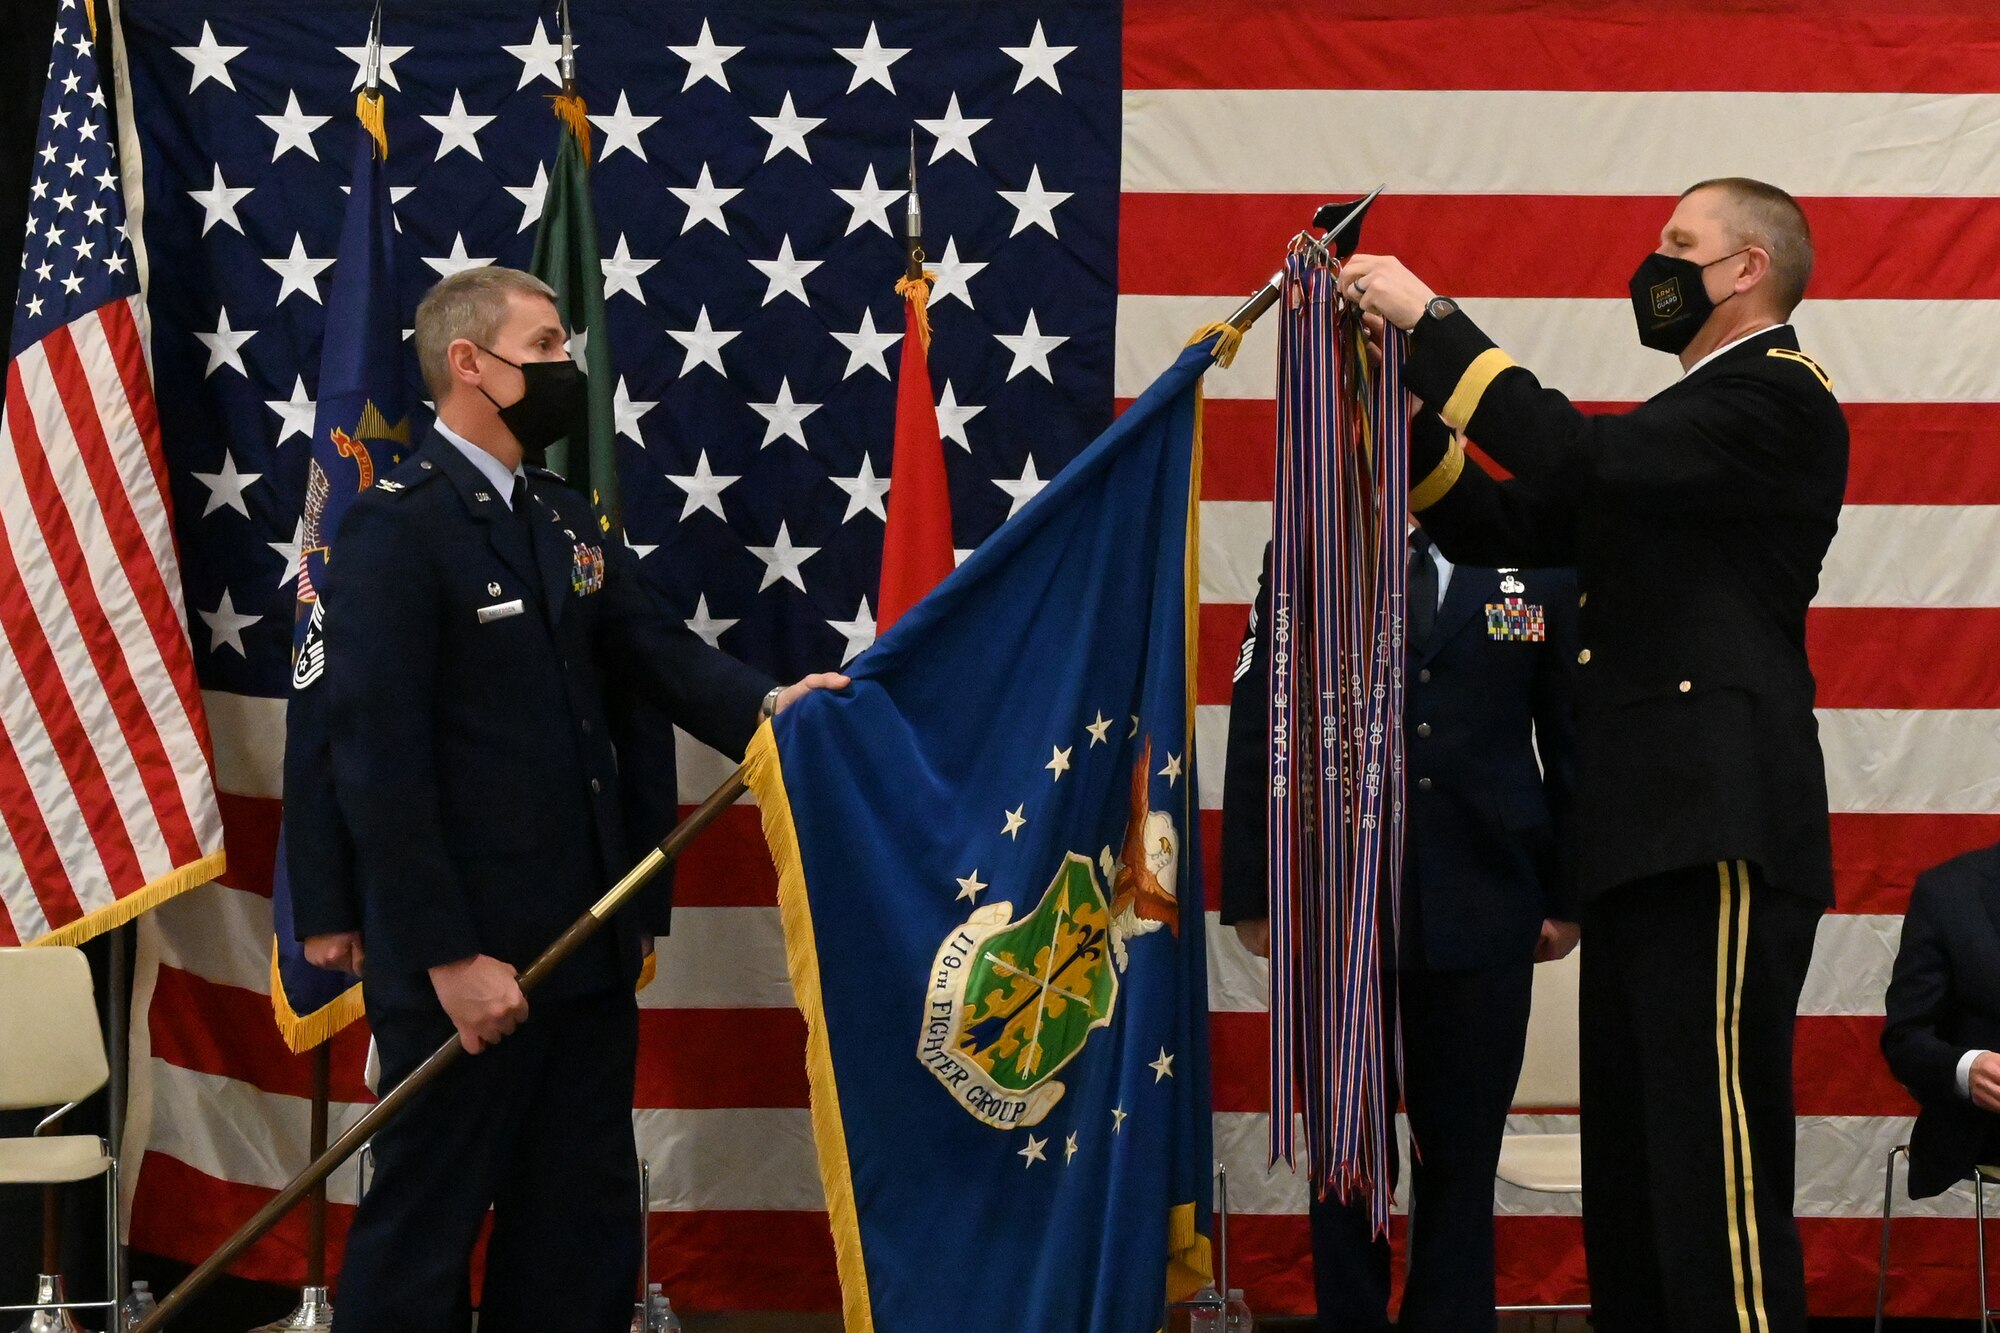 Maj. Gen. Al Dohrmann, the N.D. adjutant general places a symbolic streamer on the end of a flag staff being held by Col. Darrin Anderson, the 119th Wing commander during a ceremony on a stage in front of a large American flag at the North Dakota Air National Guard Base, Fargo, N.D., March 6, 2021.